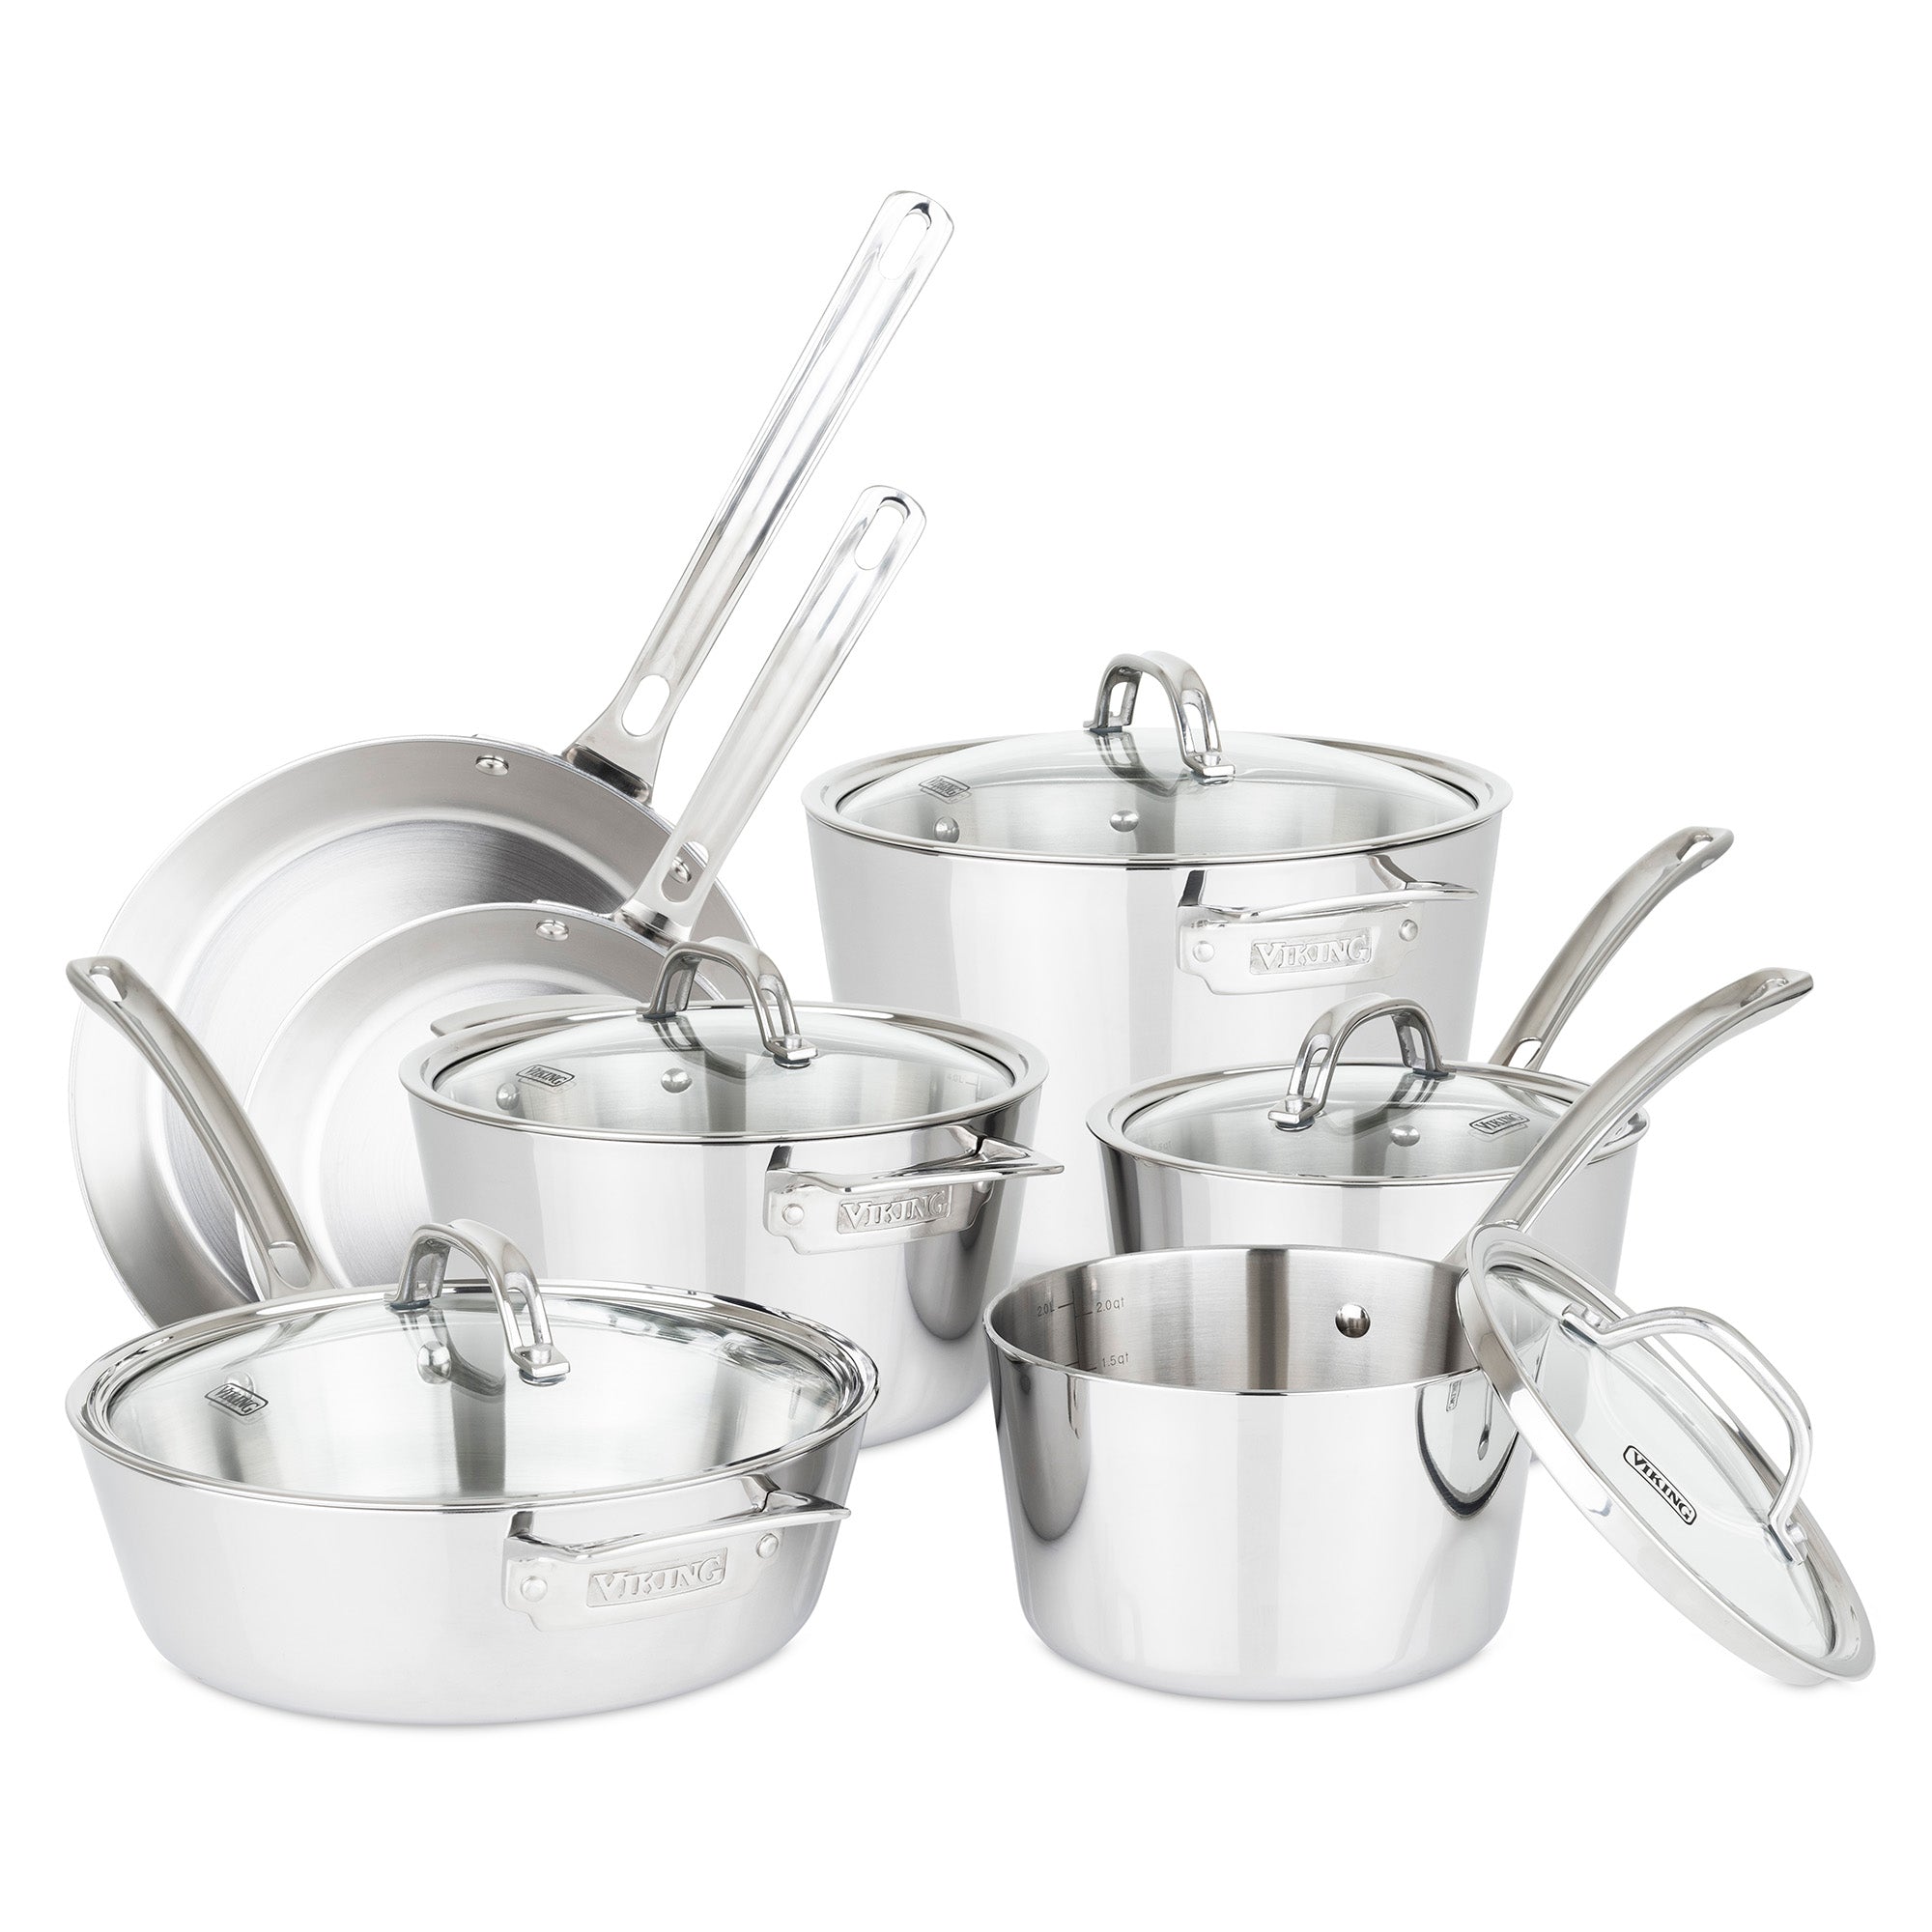 12pc Induction Stainless Steel Cookware Kitchen Glass Lids Pot Pan Set